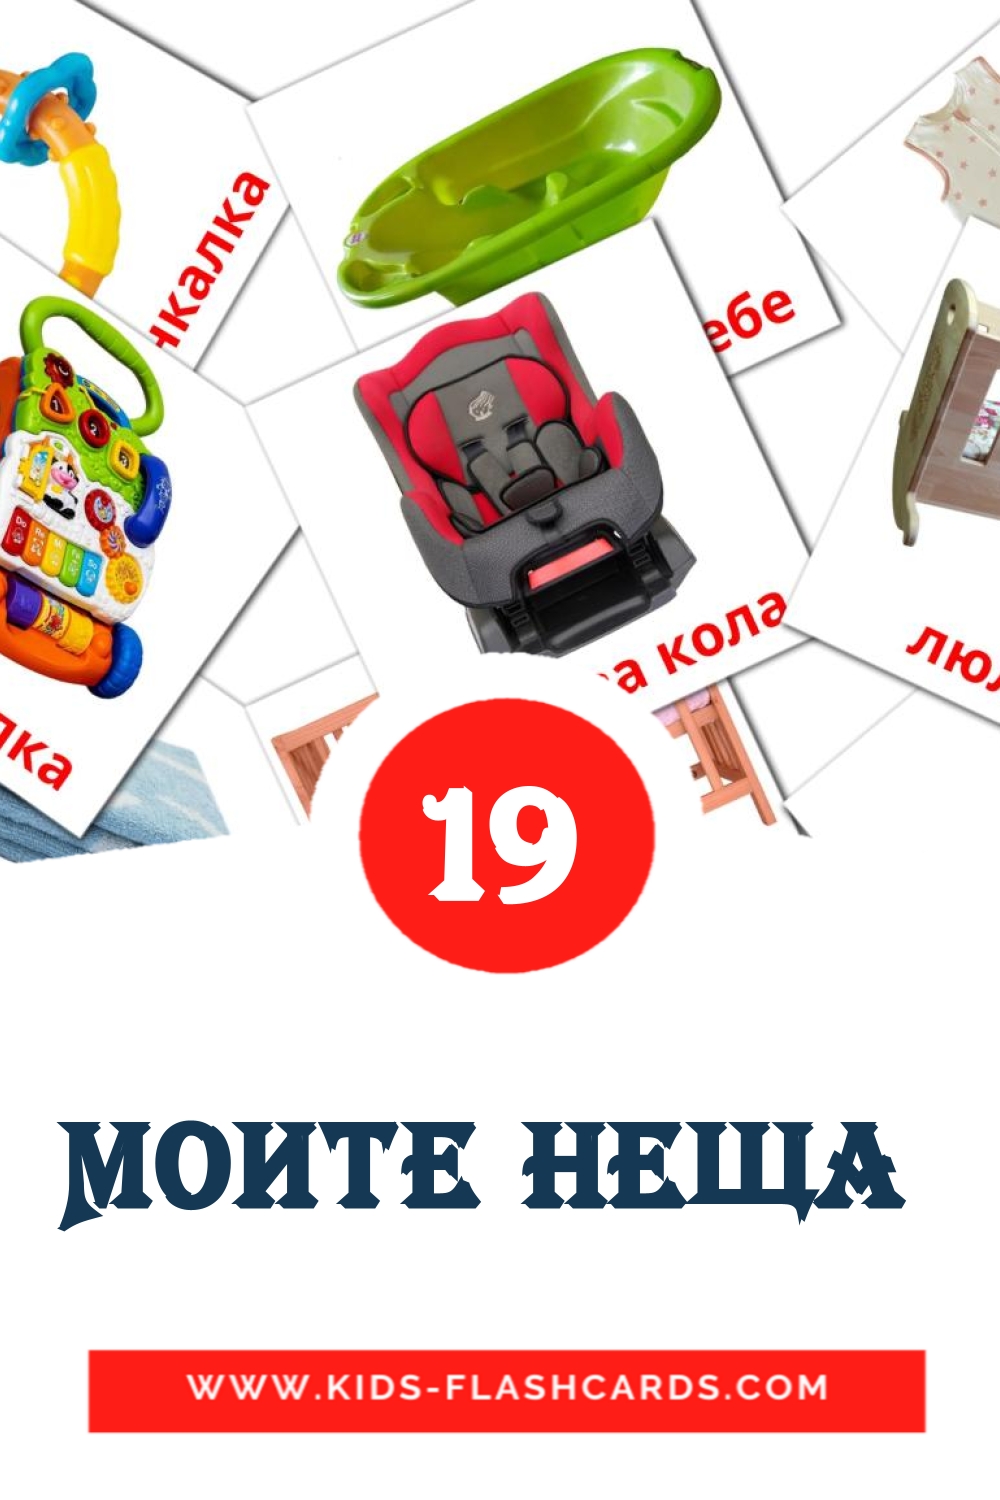 20 Моите неща  Picture Cards for Kindergarden in bulgarian